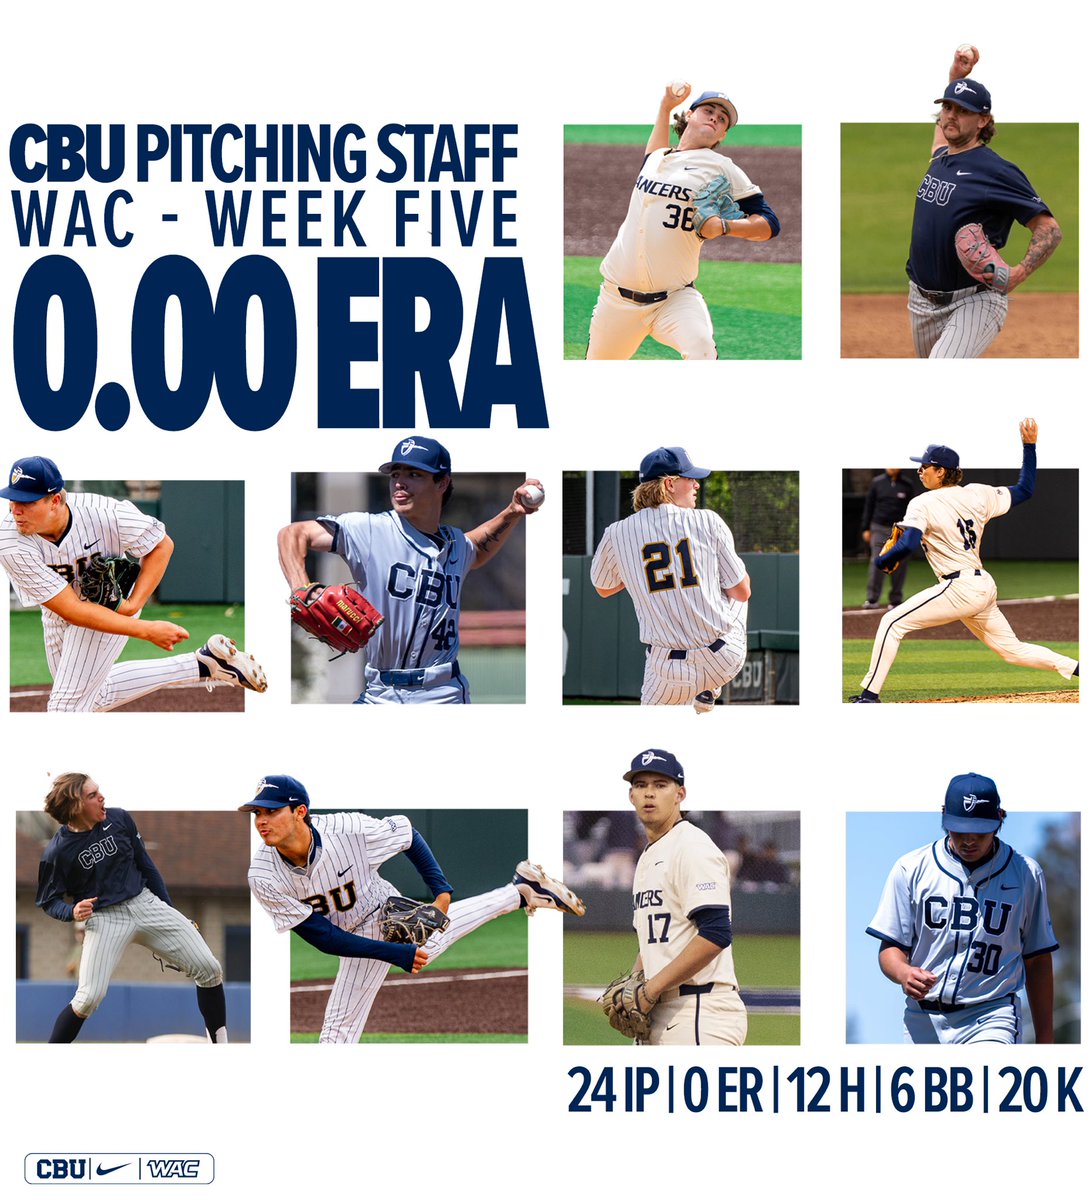 𝐈𝐭 𝐰𝐚𝐬 𝐚 𝐠𝐨𝐨𝐝 𝐰𝐞𝐞𝐤𝐞𝐧𝐝. 10 Lancer pitchers contributed to the stellar weekend on the mound for CBU, leading the program to its first three-game shutout series sweep in California Baptist baseball history👏 #LanceUp⚔️